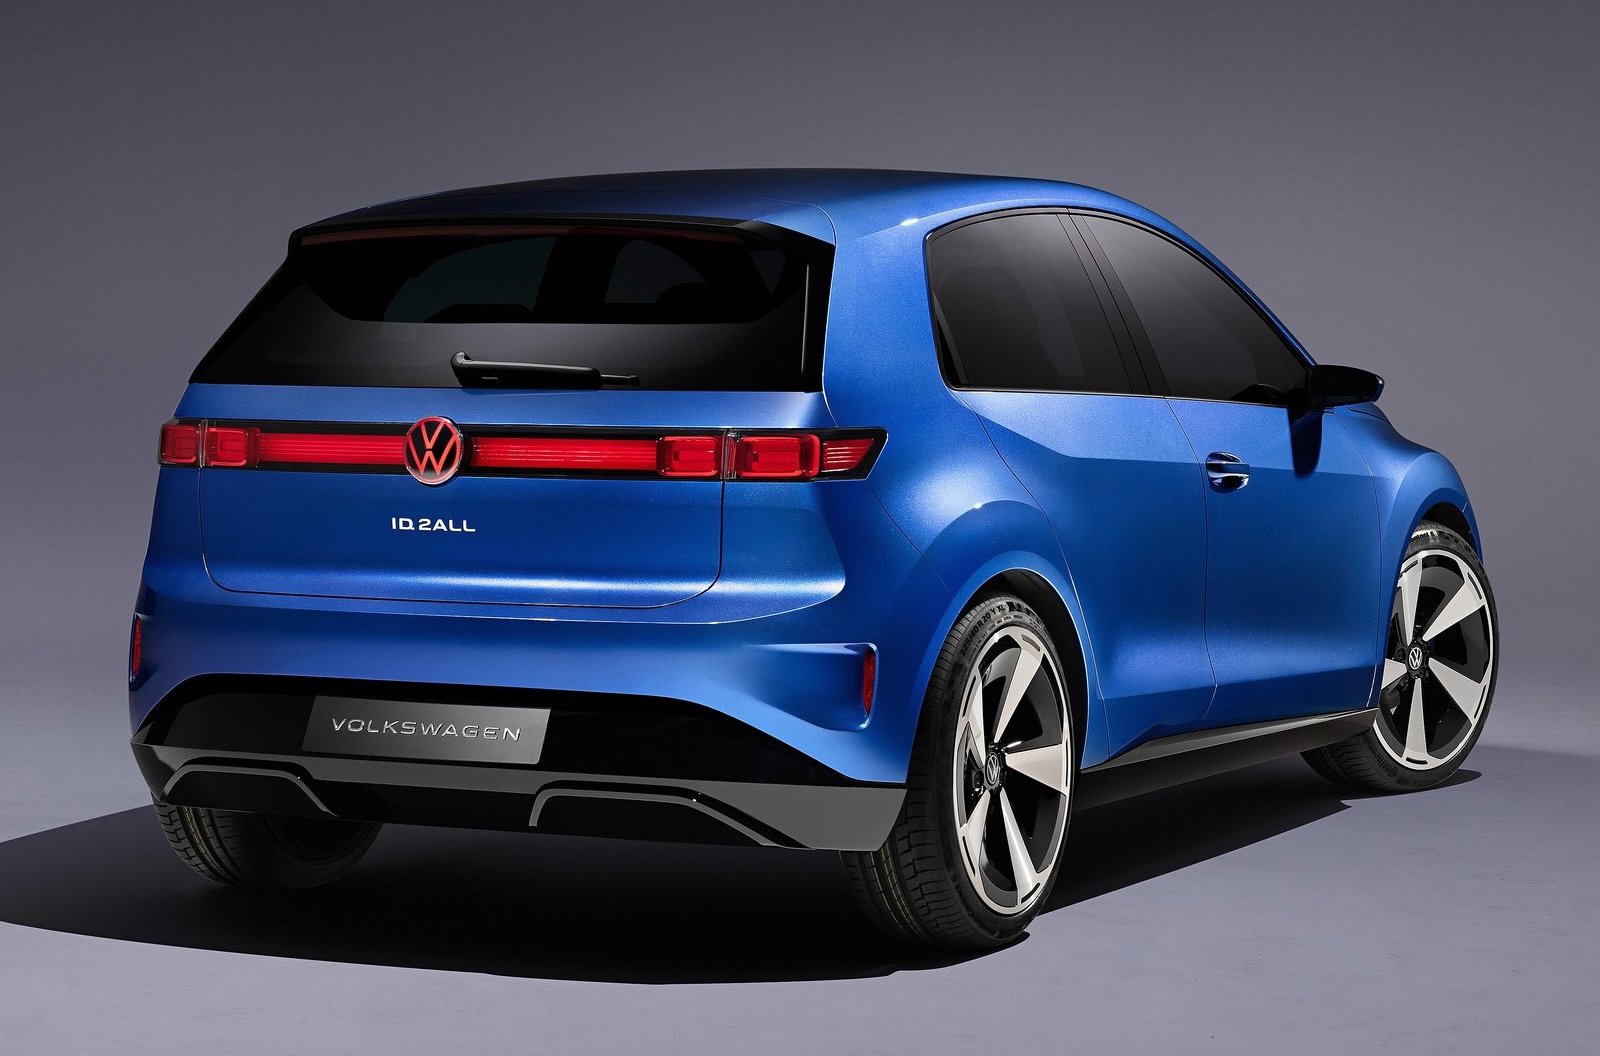 2025 volkswagen id.2all promises 450km range, gti performance, affordable price